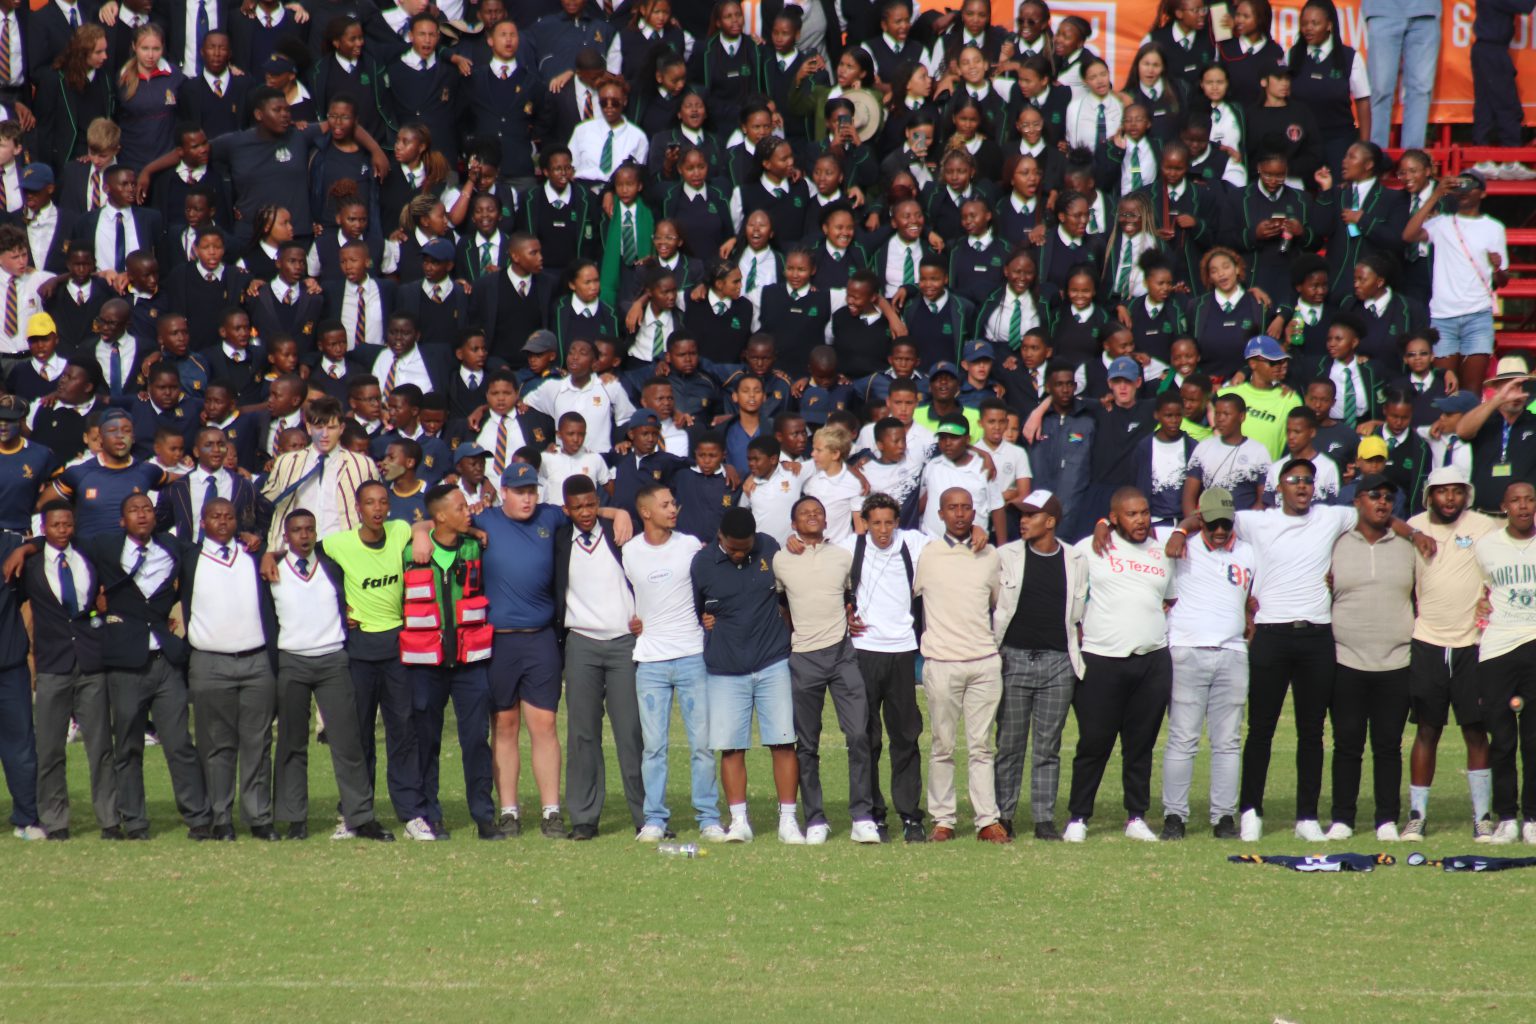 Old Graeme boys join the current Graemians at half-time, chanting their school song as a half-time tradition. Photo, Nothando Yolanda Tshuma.